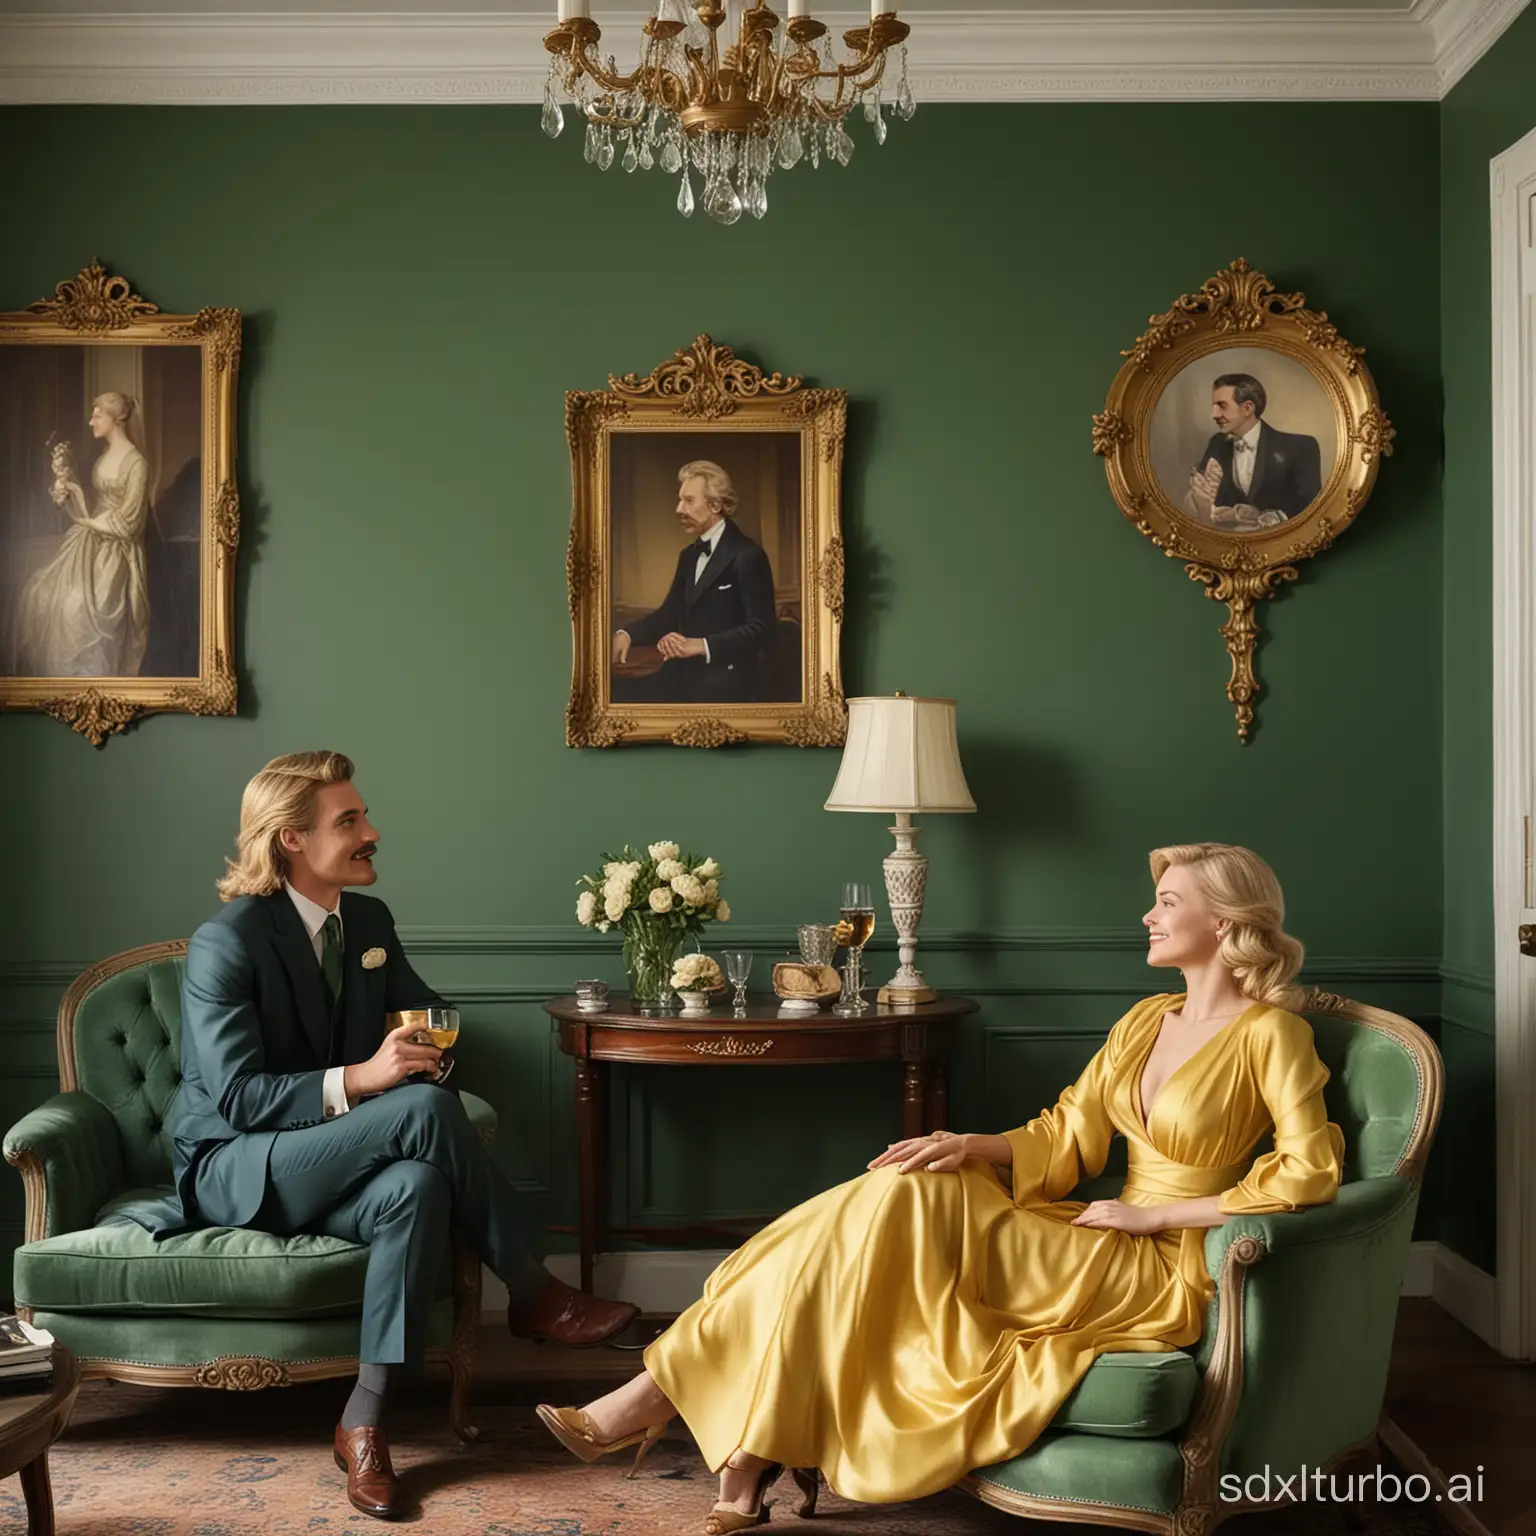 Visualize a sophisticated, intimate setting in a vintage living room. At the center, a man and a woman with blond hair sit opposite each other on plush emerald green upholstered armchairs. The man, positioned on the left, sports a neatly trimmed mustache and is dressed in a sharply tailored navy-blue suit with a white shirt and dark tie. He is holding a stemmed glass, sharing an amused glance with the woman. On the right, the woman is dressed in a flowing golden-yellow gown with long, elegant sleeves. Her hair is styled in an intricate updo. She too is holding a stemmed glass and smiles back at the man. A small glass table stands between them, upon which rests a silver ashtray. The setting is completed by soft green walls with period molding, a dark-framed portrait of a woman hanging on the wall, and a torch-shaped wall sconce. The room is filled with soft lighting, suggesting a peaceful afternoon ambiance. 